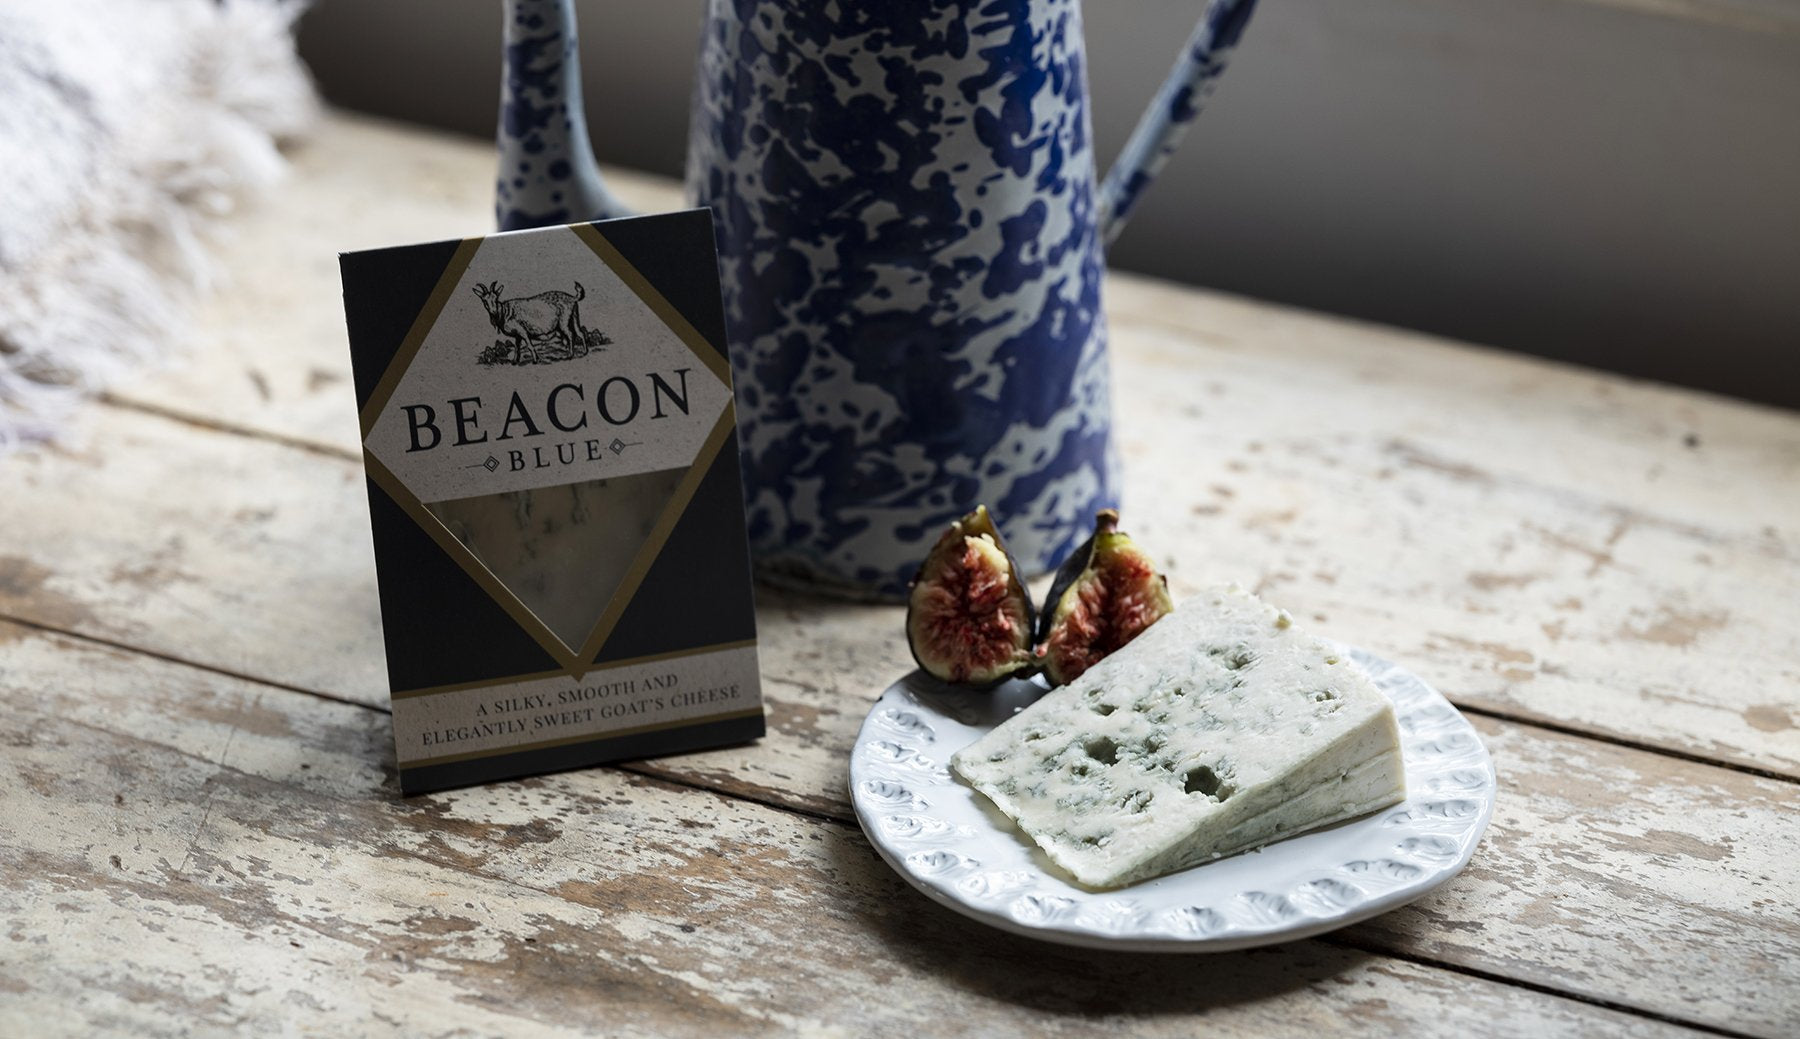 Beacon Blue Cheese served with figs. Beacon Blue is a Lancashire blue goats cheese from Butler's.